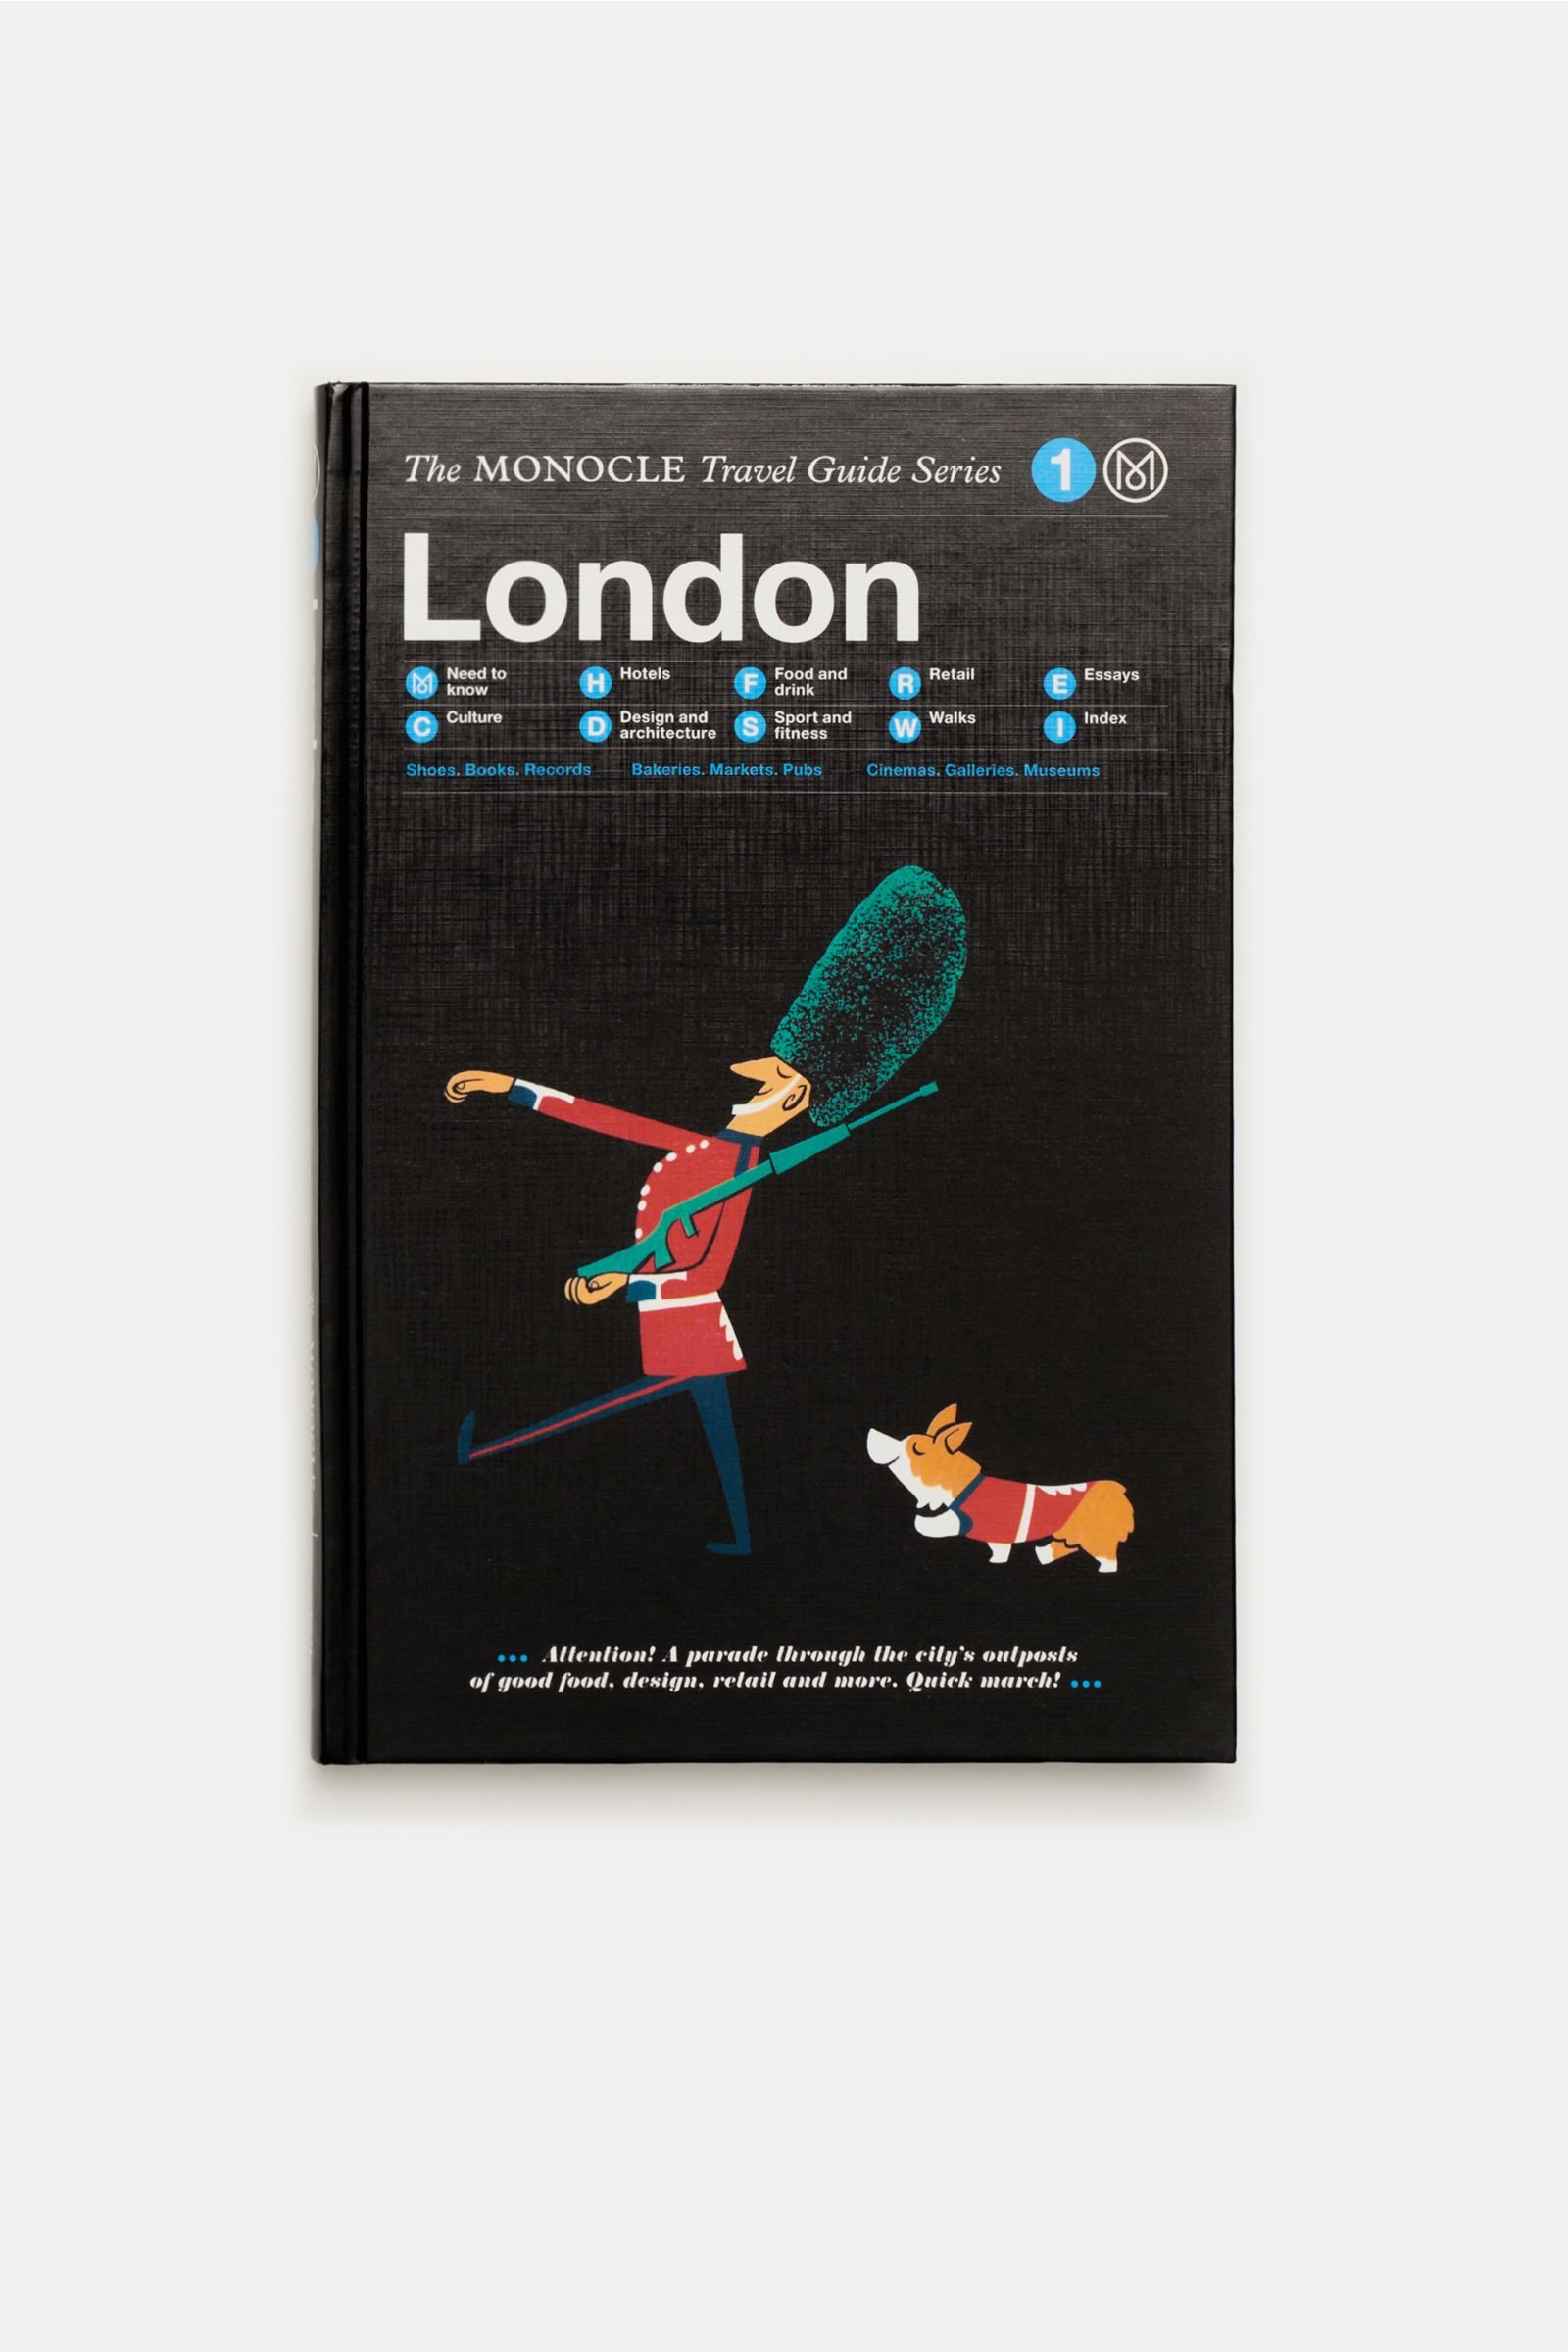 Travel guide 'London' – The Monocle Travel Guide Series